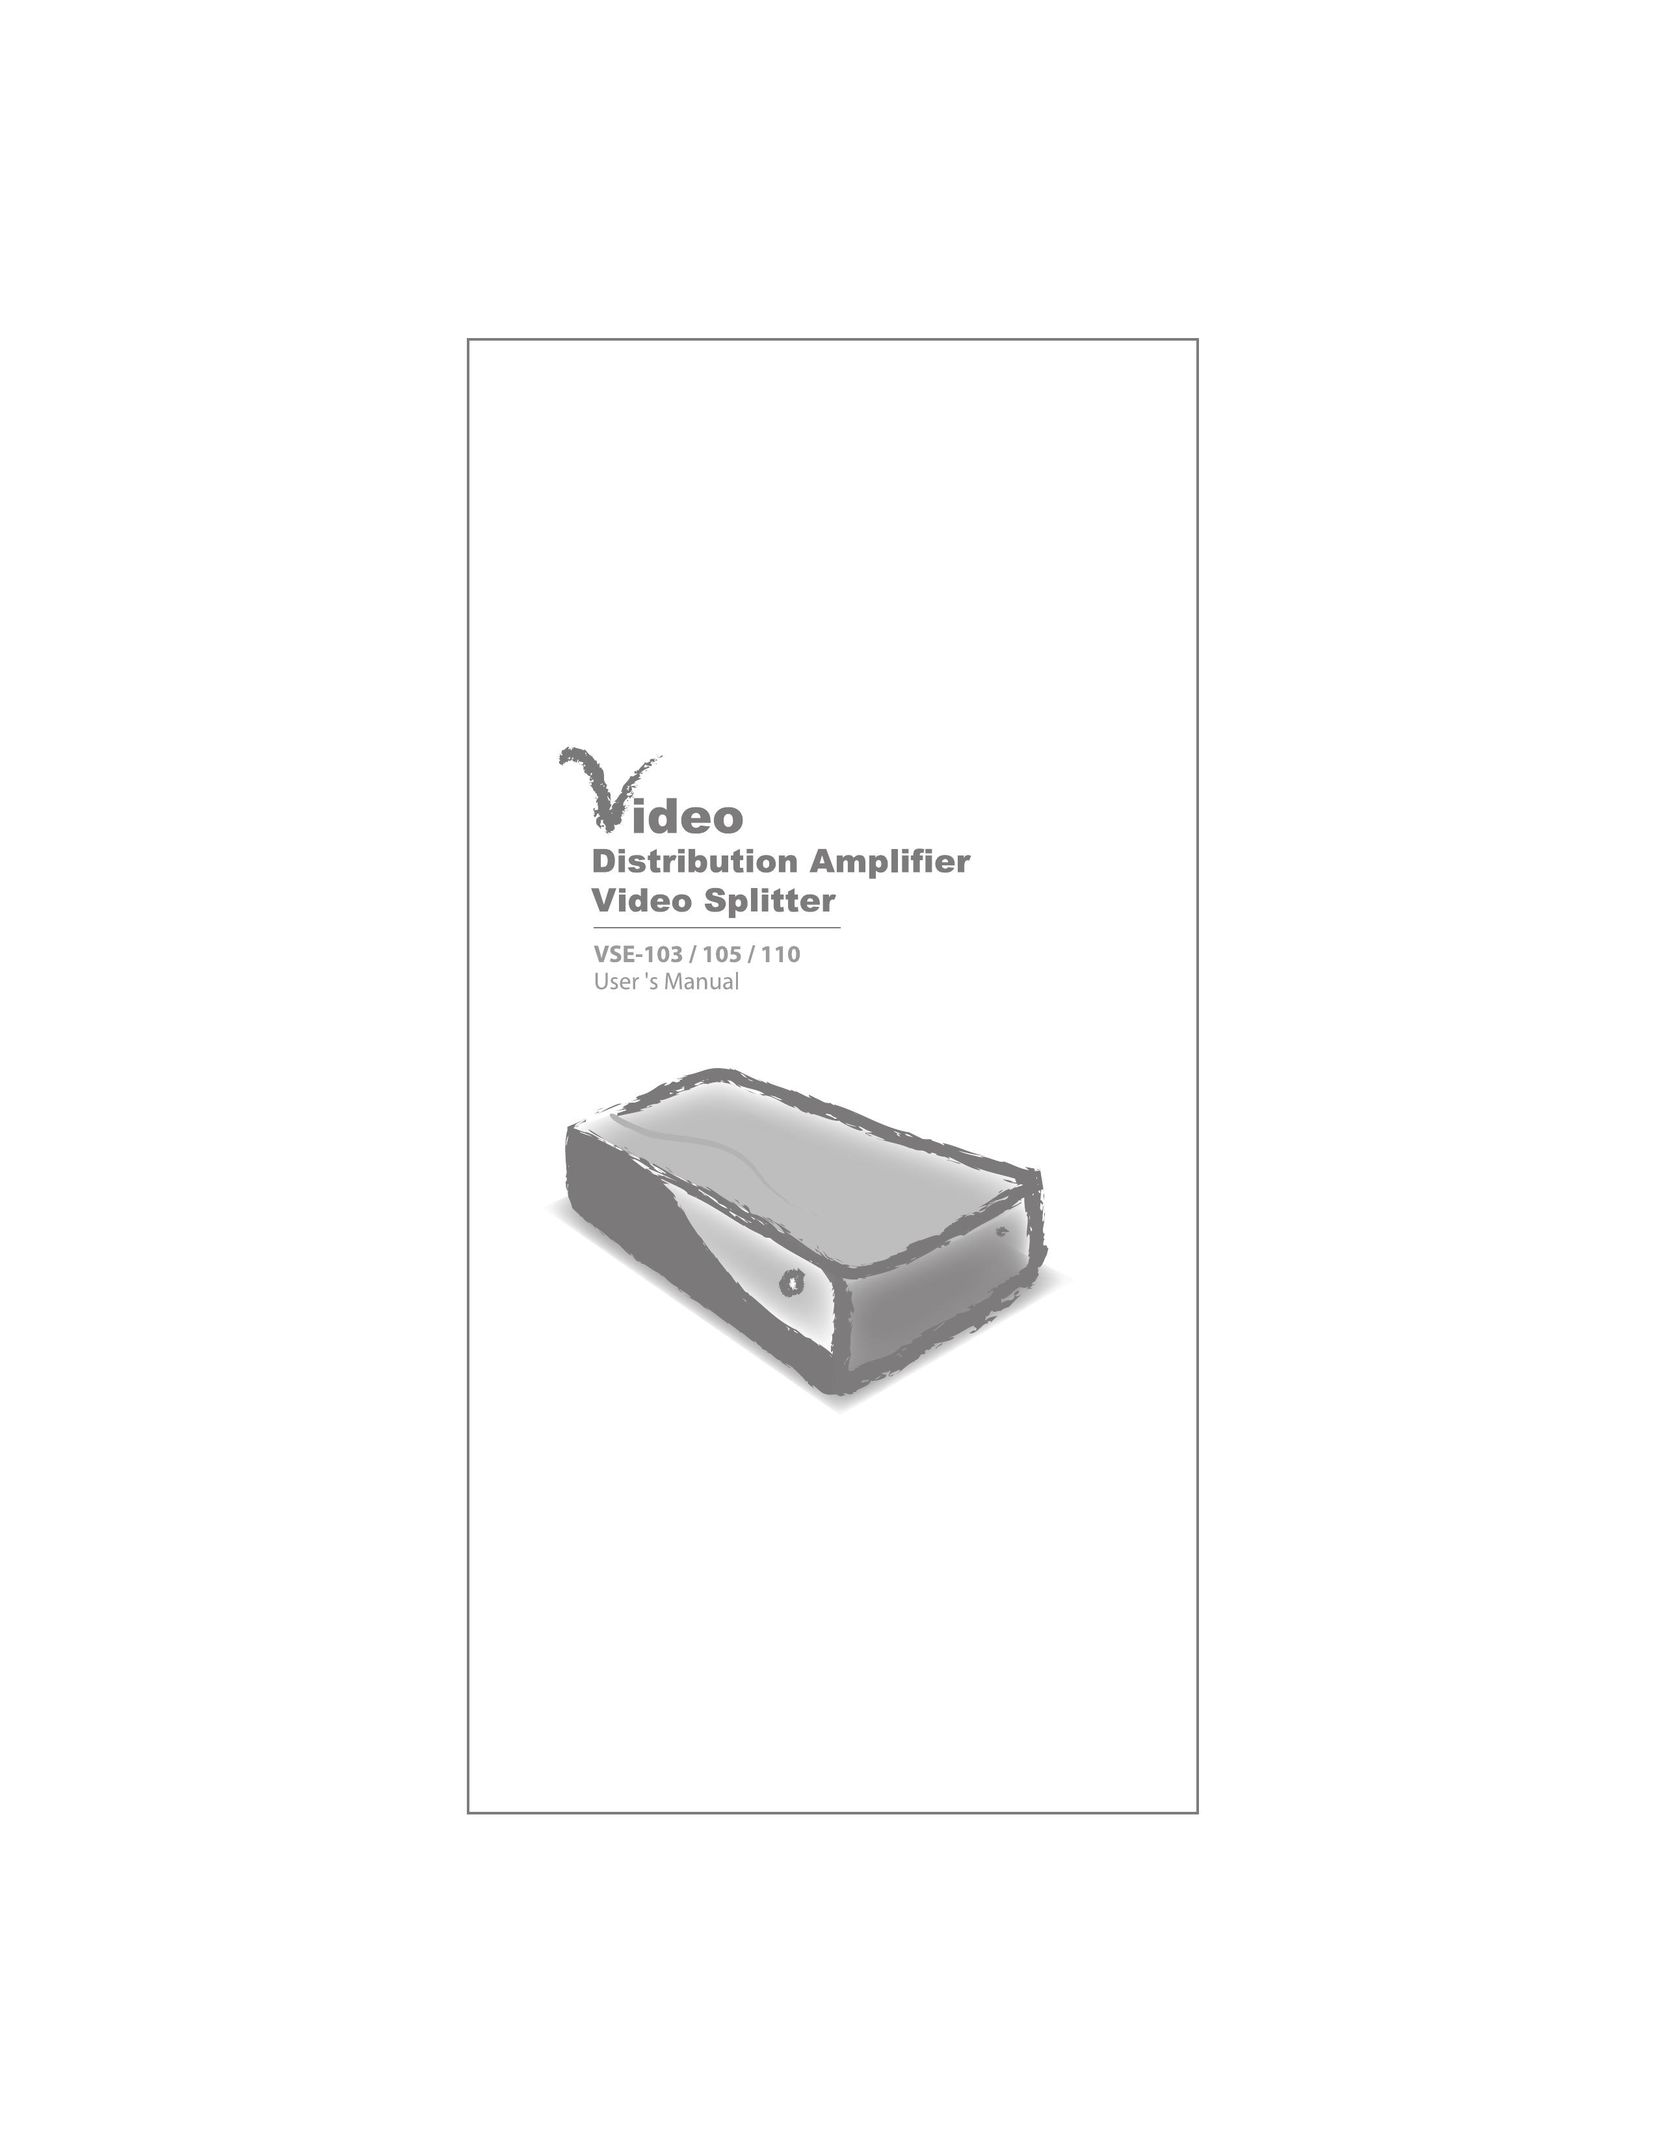 ConnectPRO VSE110 Switch User Manual